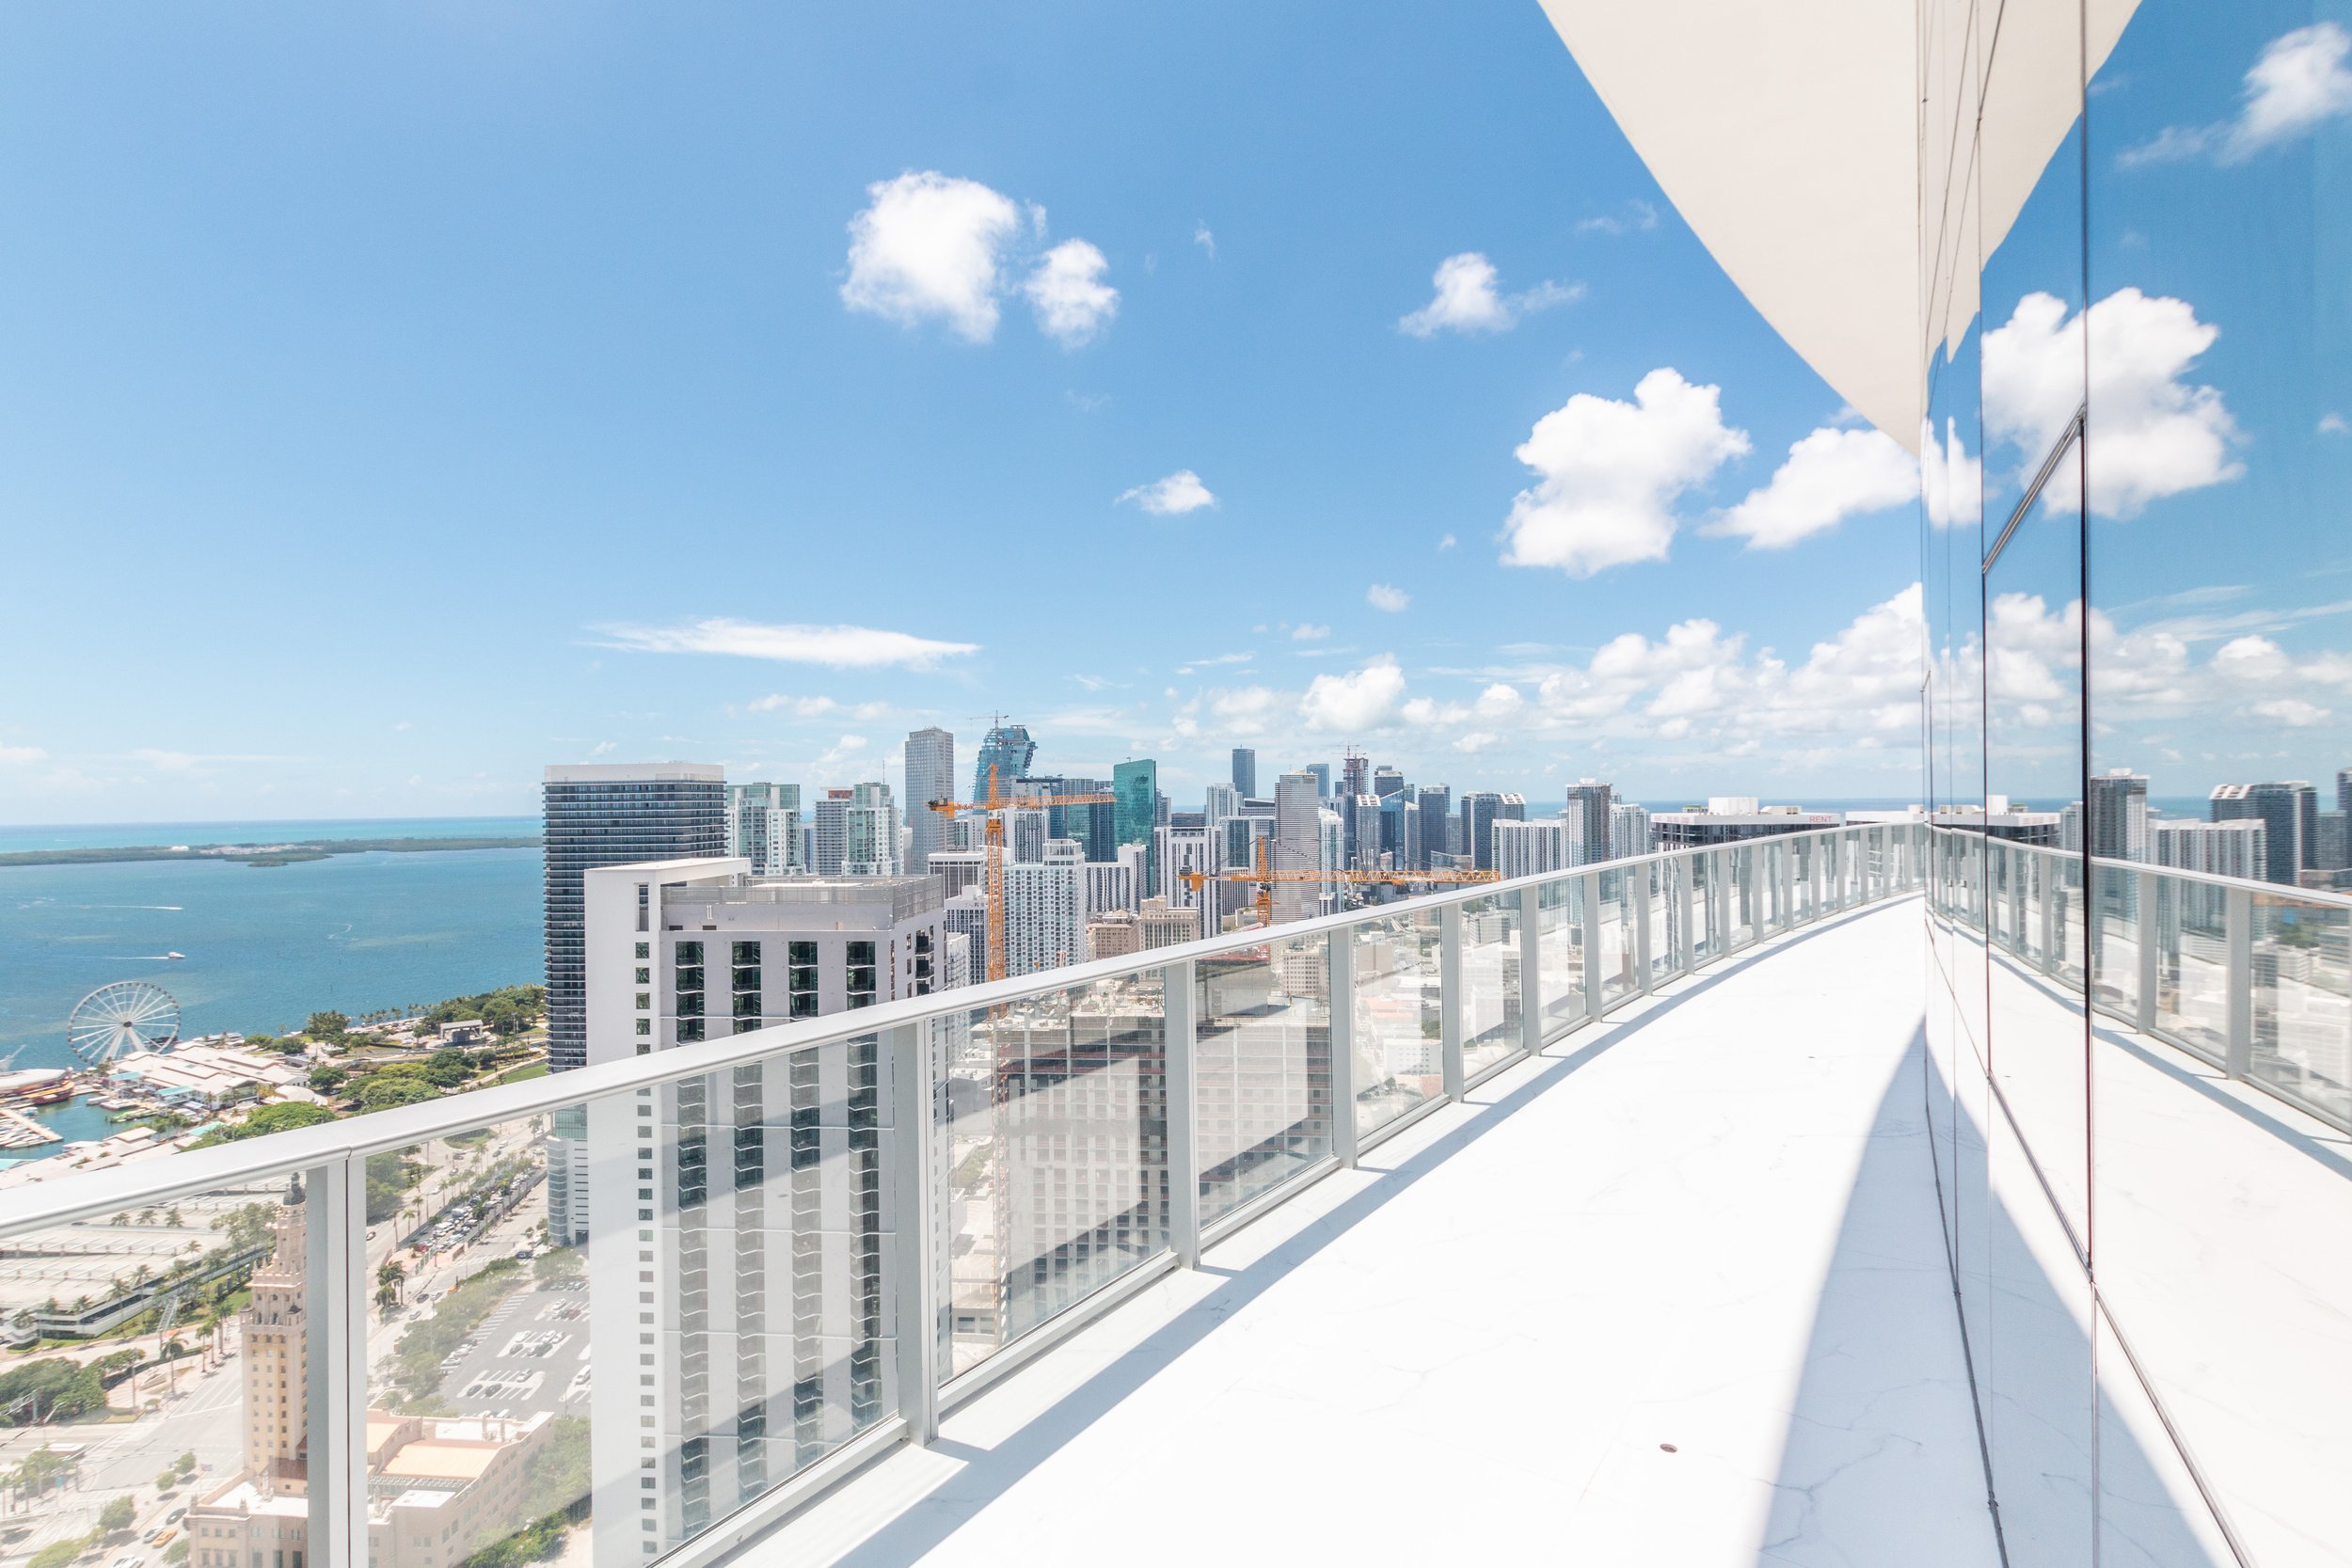 Step Inside A Sky-High Ultra-Luxe Penthouse At PARAMOUNT Miami Worldcenter For Rent Asking $40K Per Month ALTARA Properties Scott Lawrence Porter 1.38.jpg